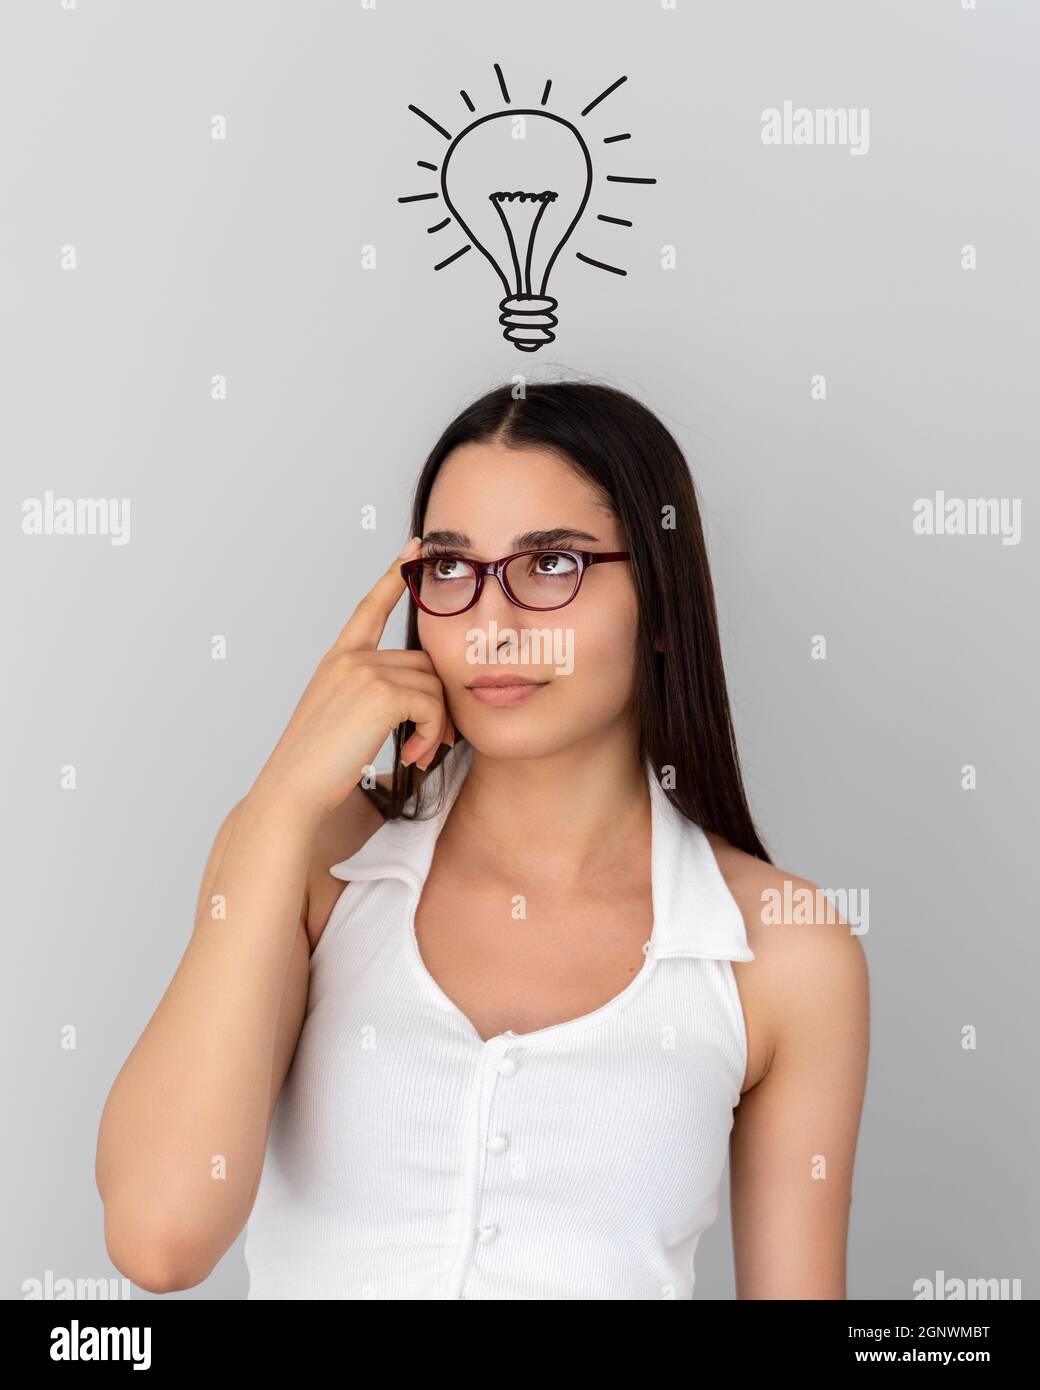 Young thinking woman with abstract bulb drawing on head. idea, solution, toughts concept. High quality photo Stock Photo